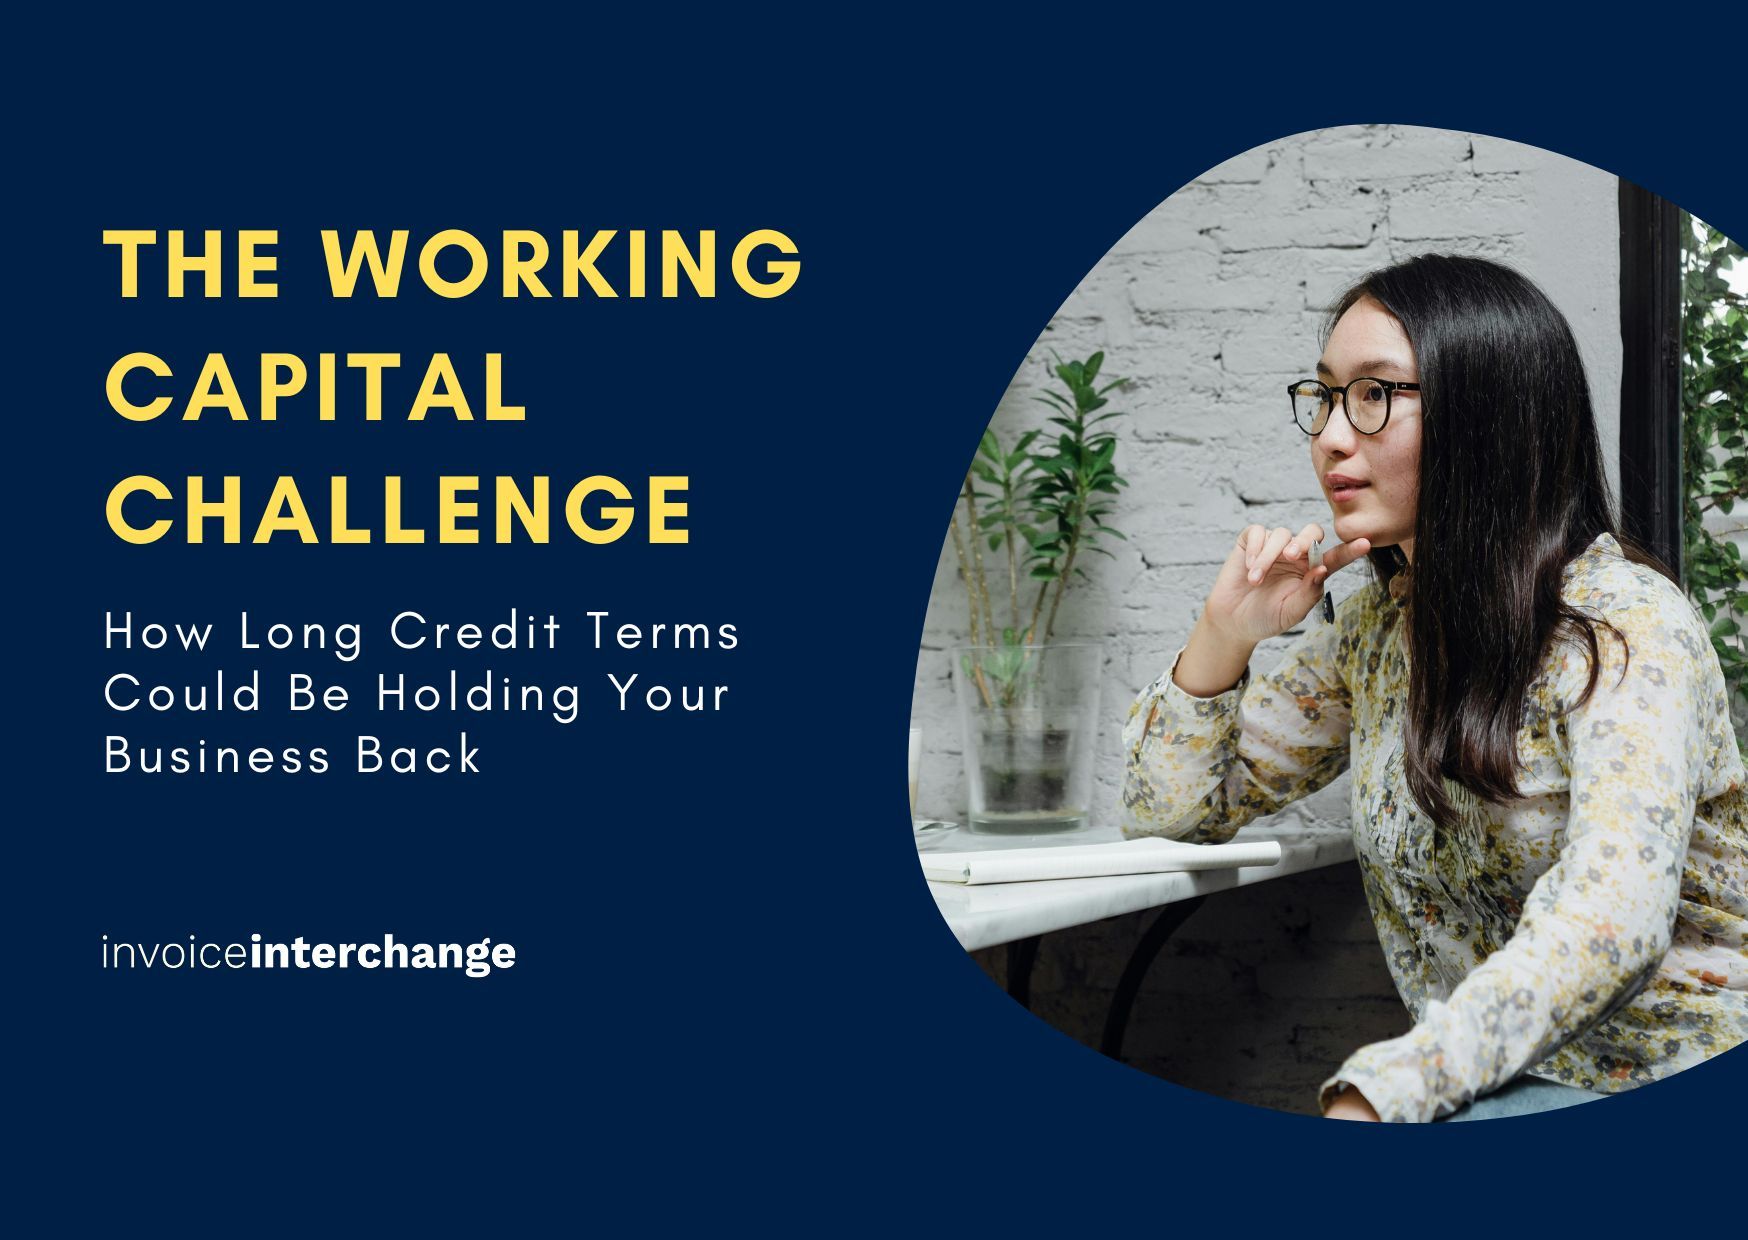 The Working Capital Challenge: How Long Credit Terms Could Be Holding Your Business Back